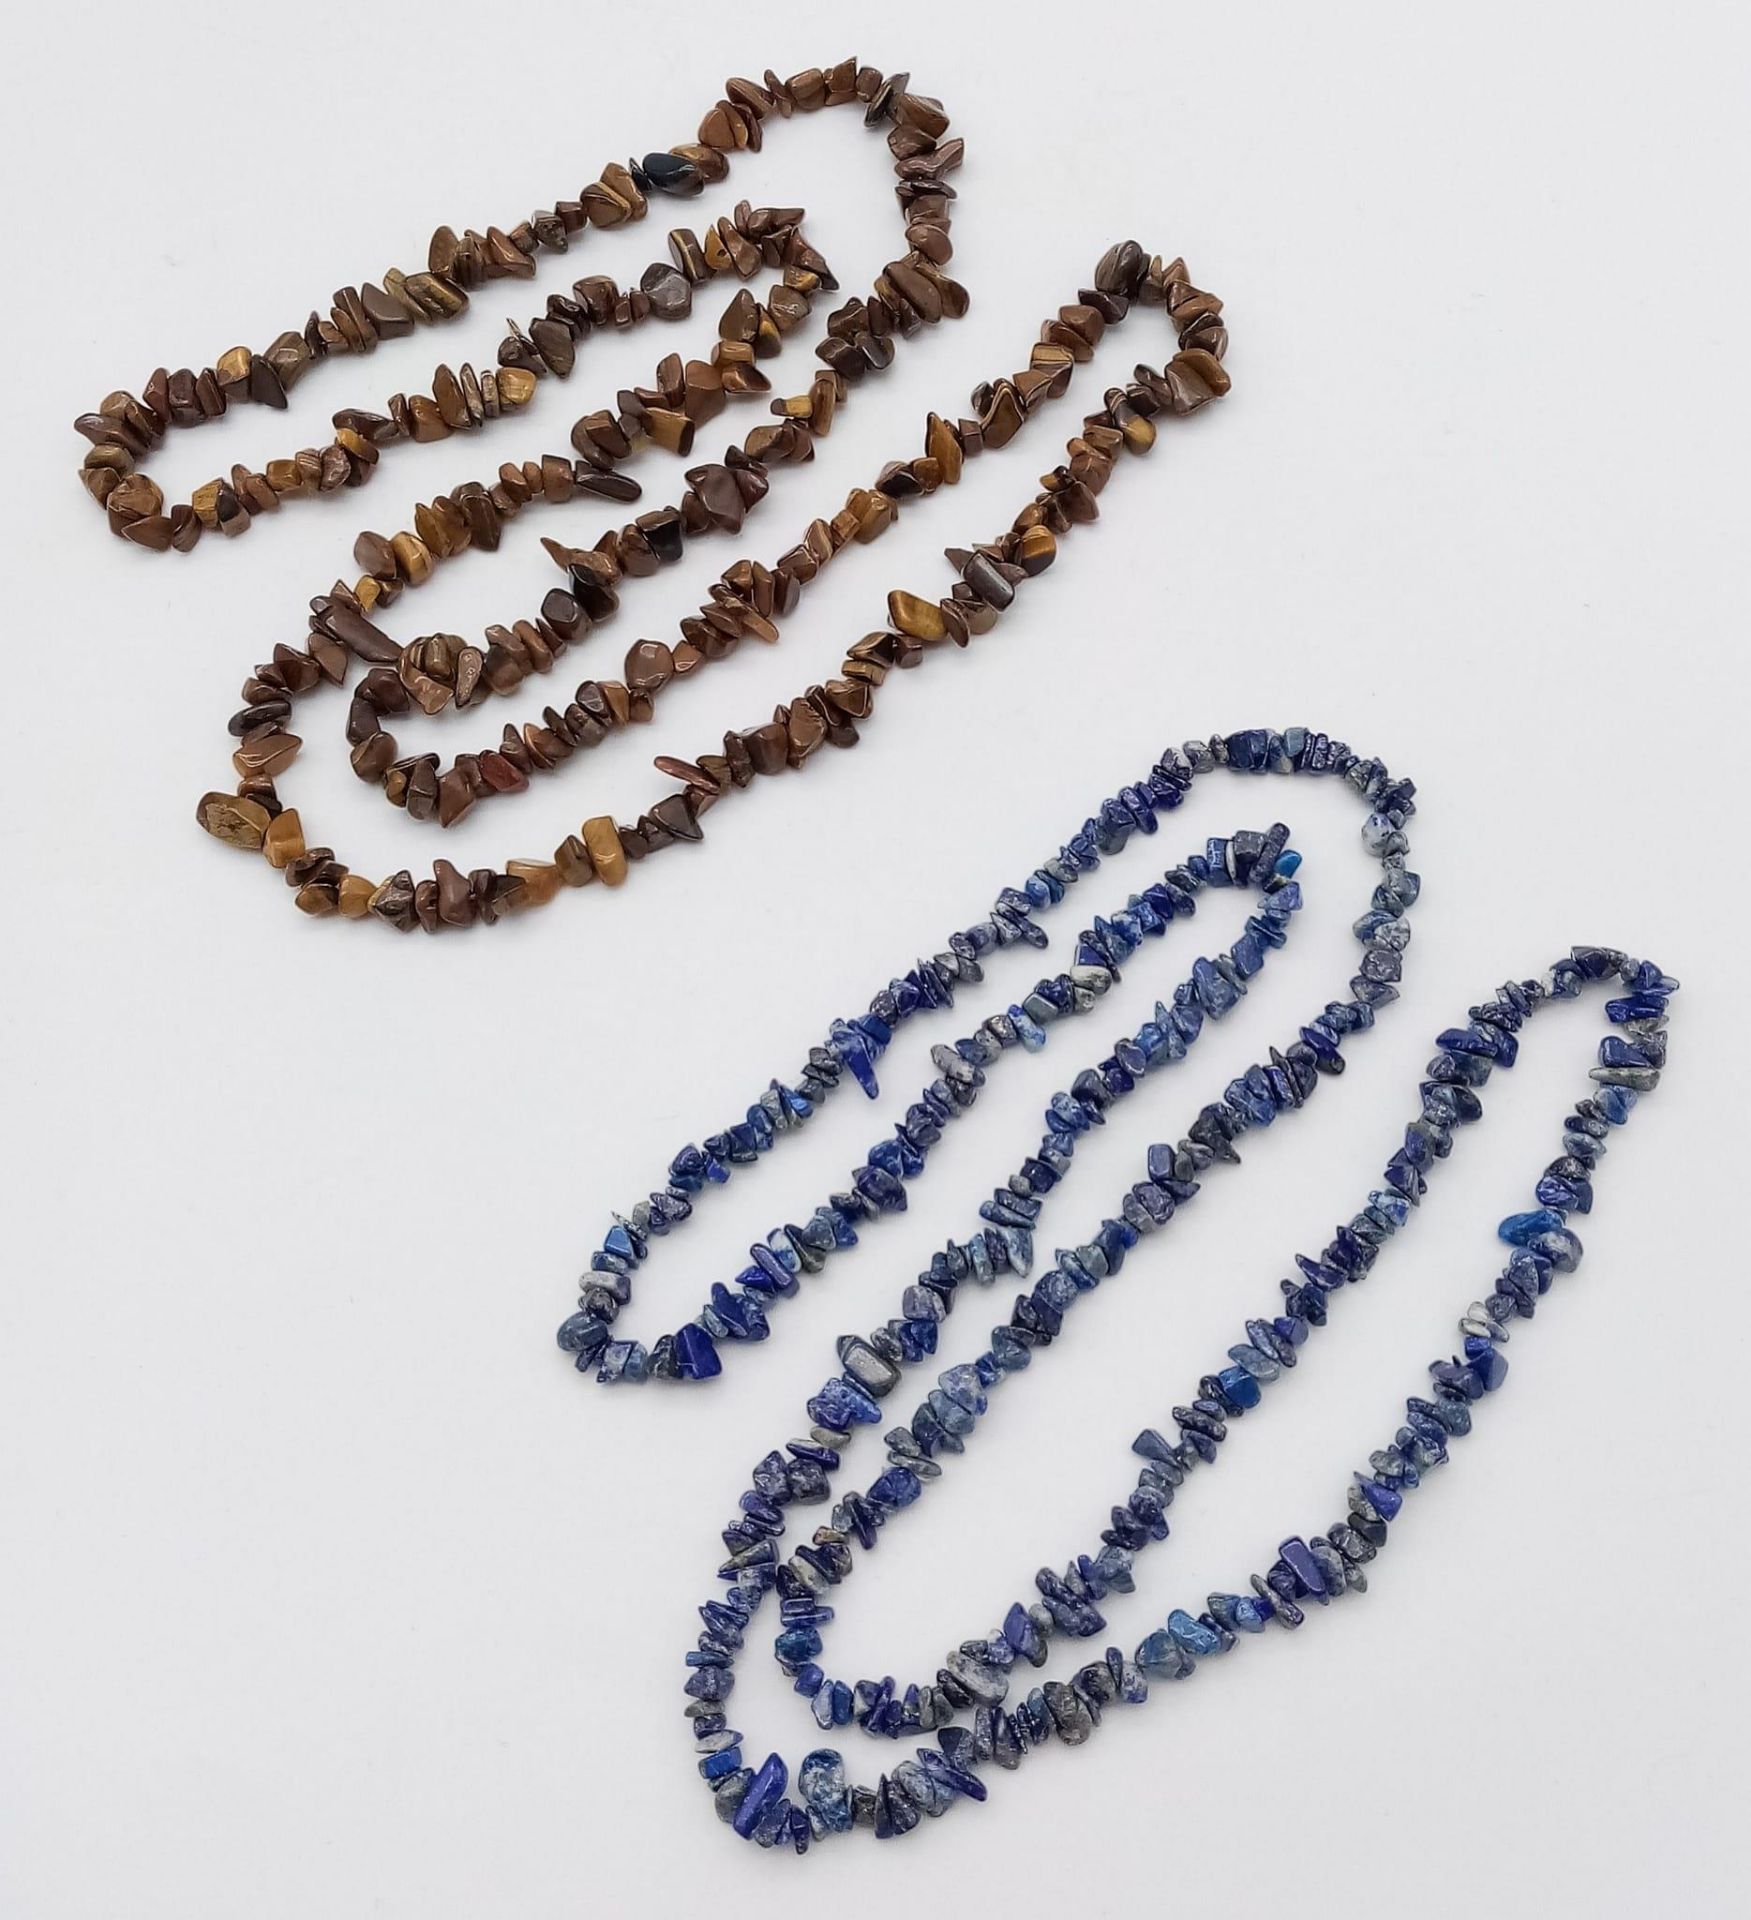 Two Rough Natural Gemstone Necklaces. Tigers Eye and Lapis Lazuli. Both 86cm.